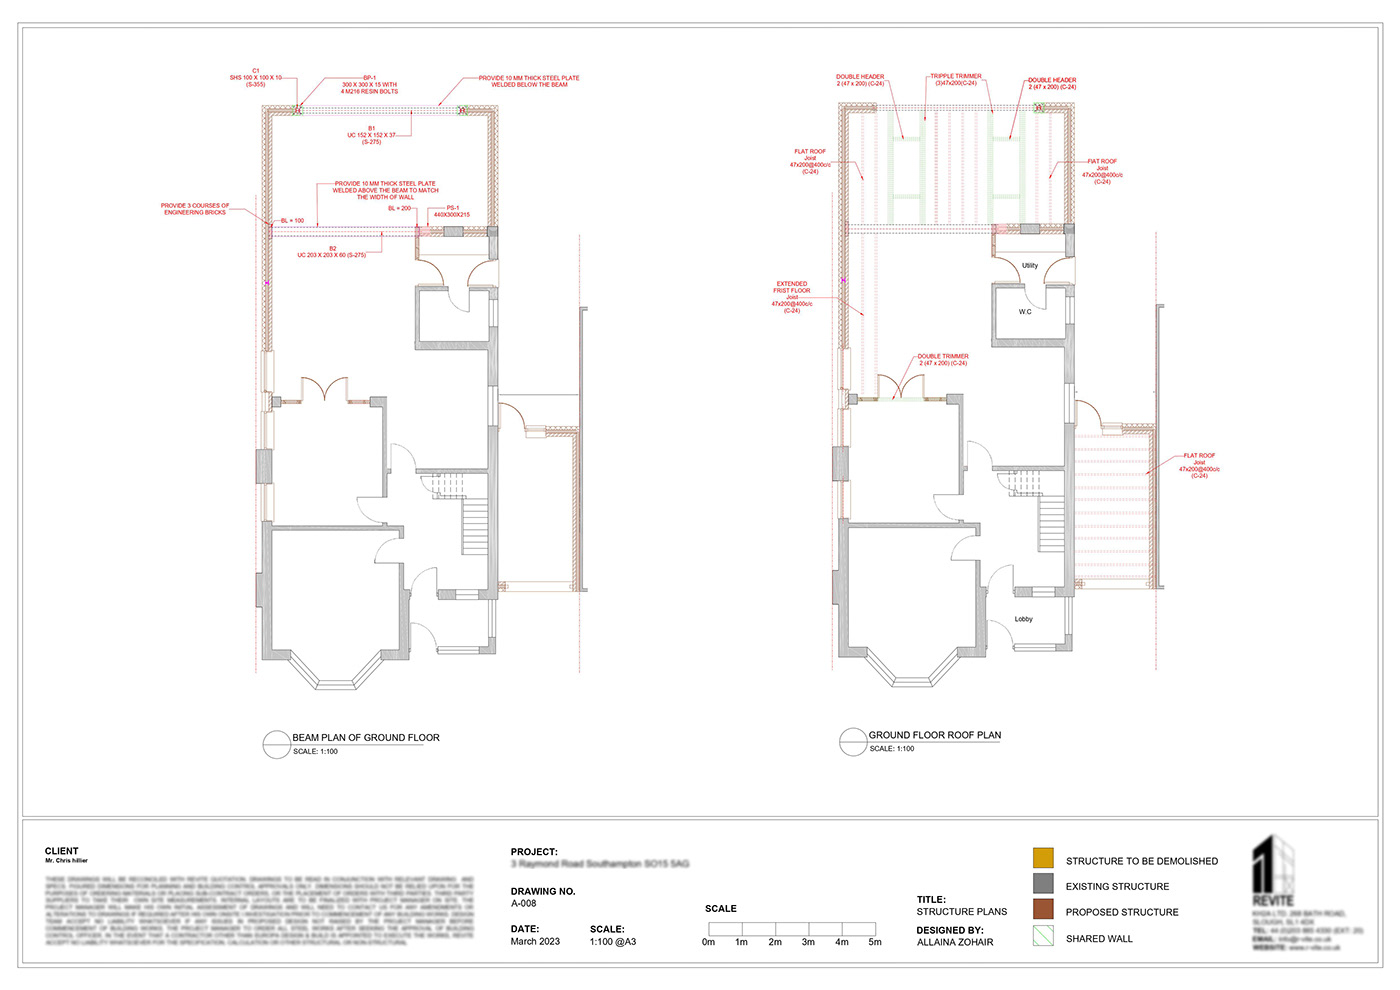 working drawings floorplan 3D Elevation section renovation architecture